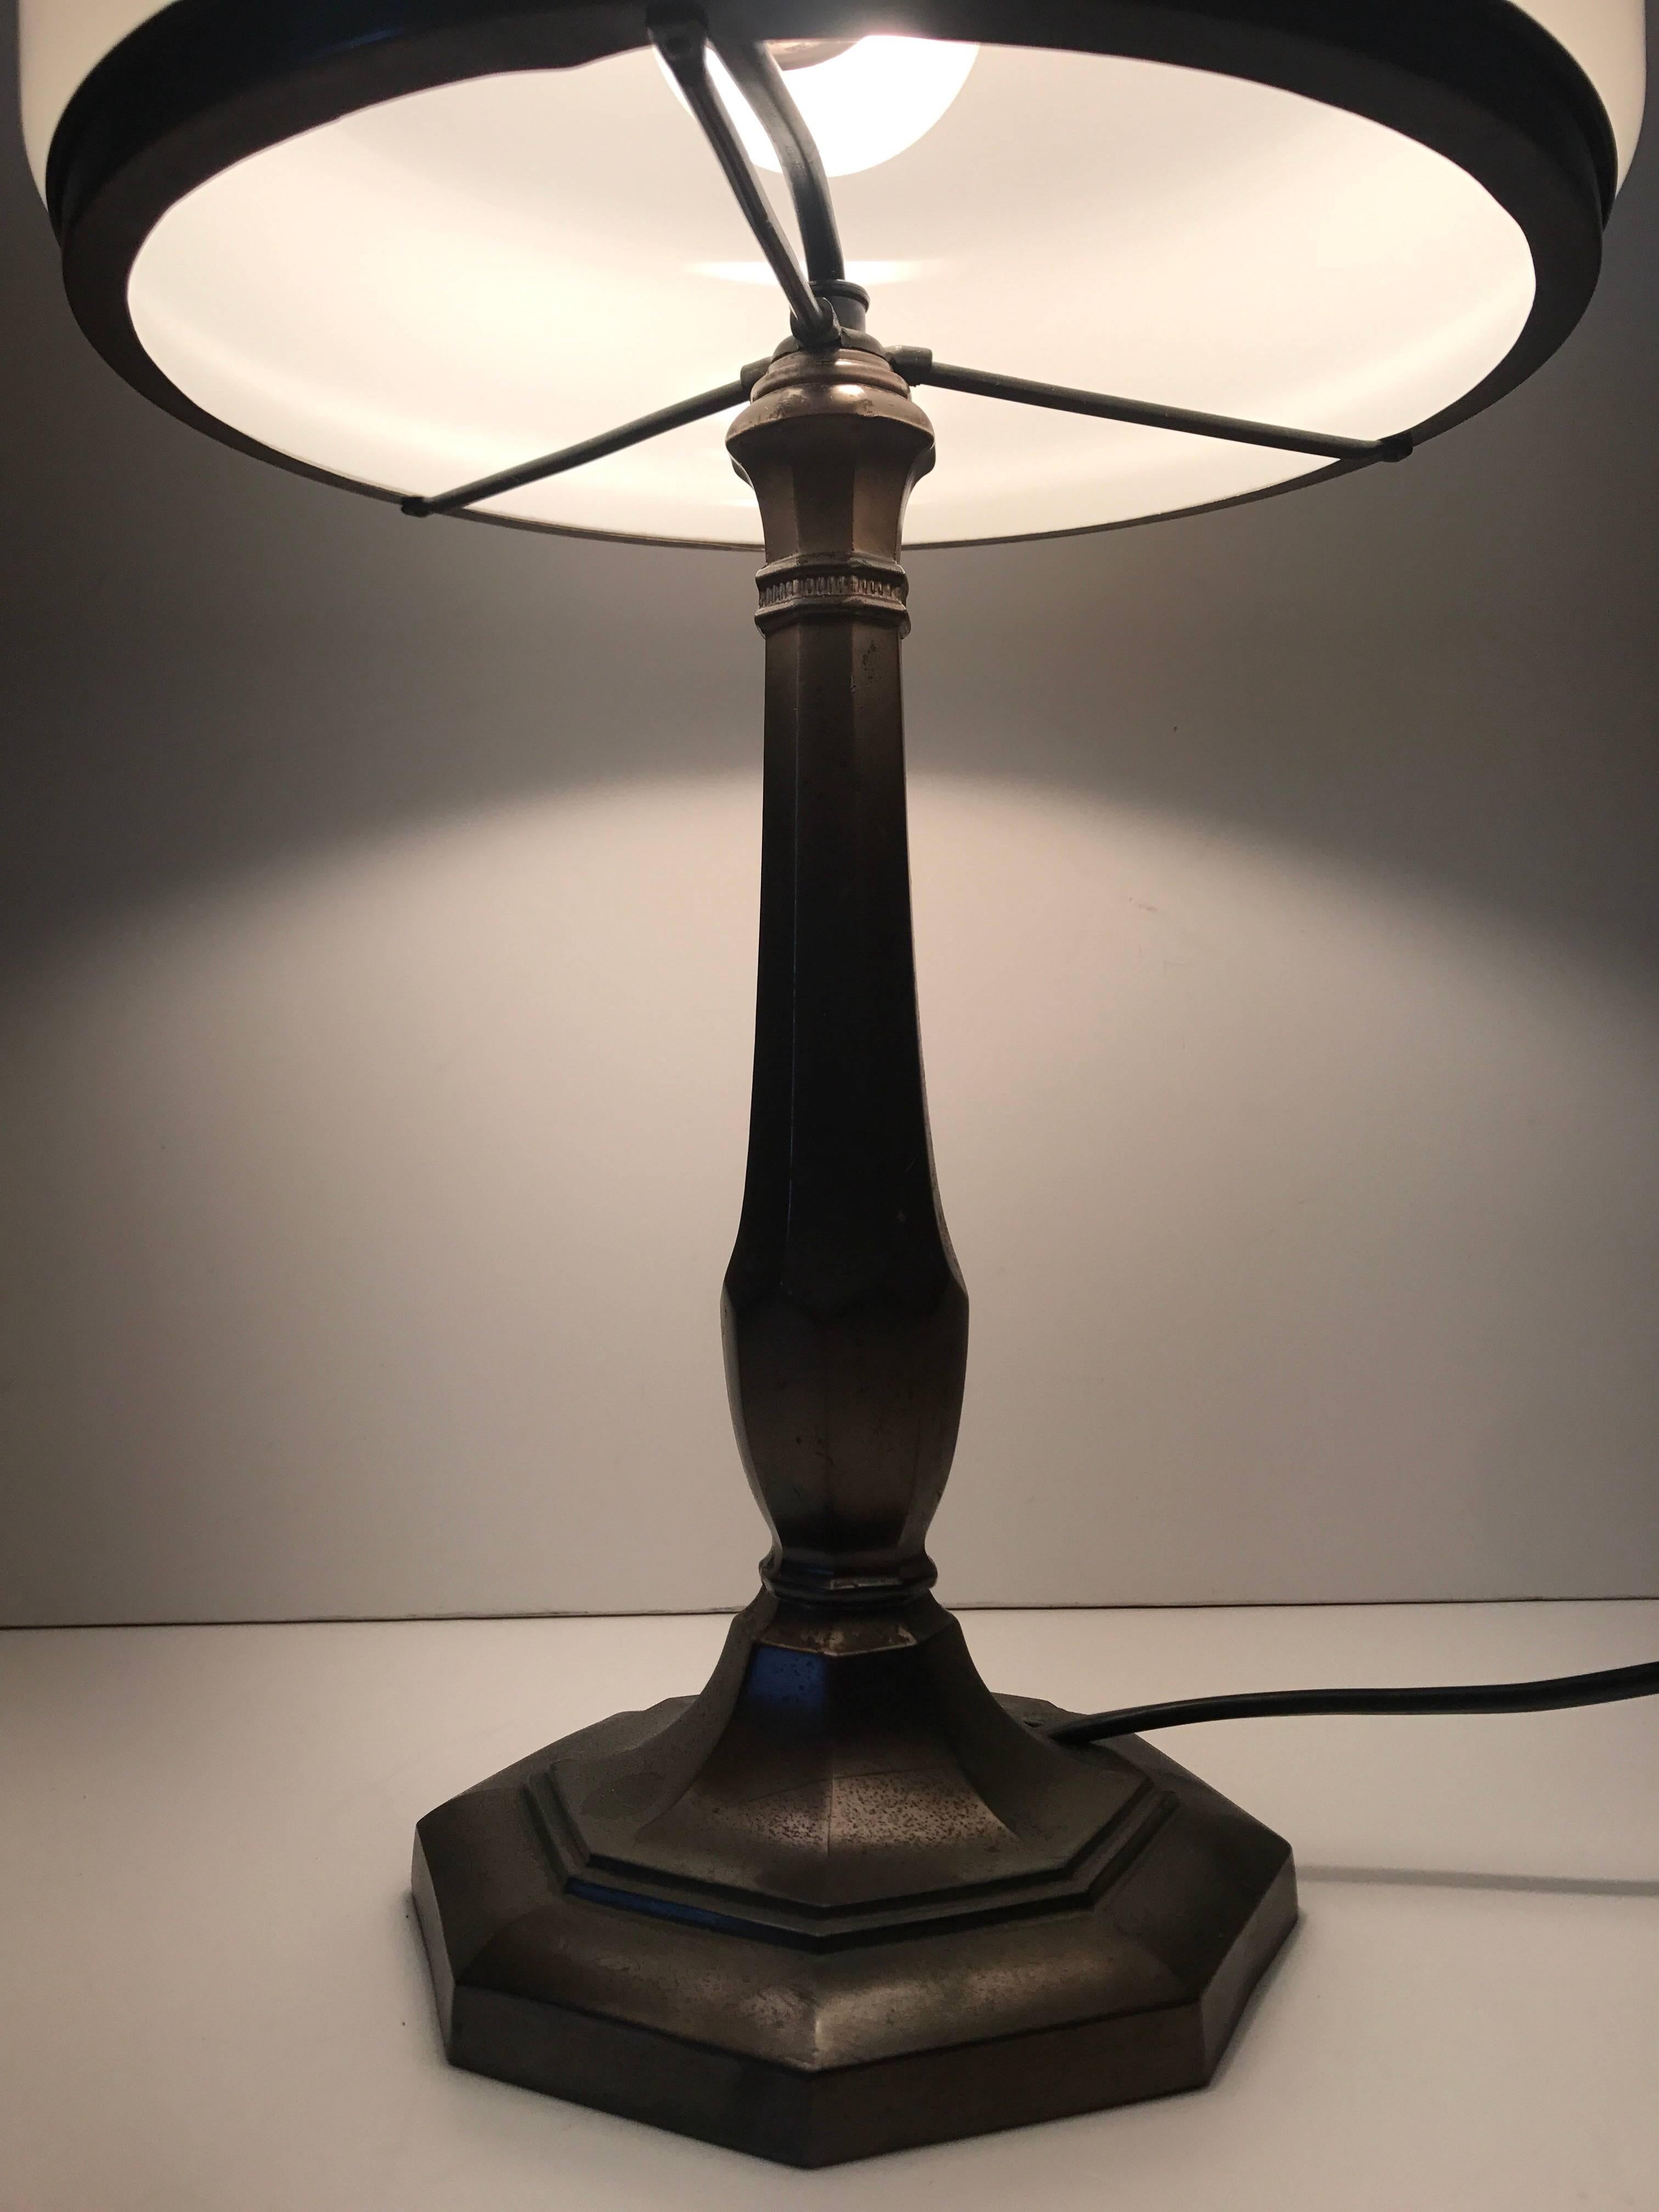 Swedish Jugendstil Art Nouveau copper patinated metal table lamp.
A beautiful table lamp, made in the 1920s in Sweden, the glass shade comes most likely from the well known art glass workshops Orrefors or Pukeberg. The lamp is in a fantastic